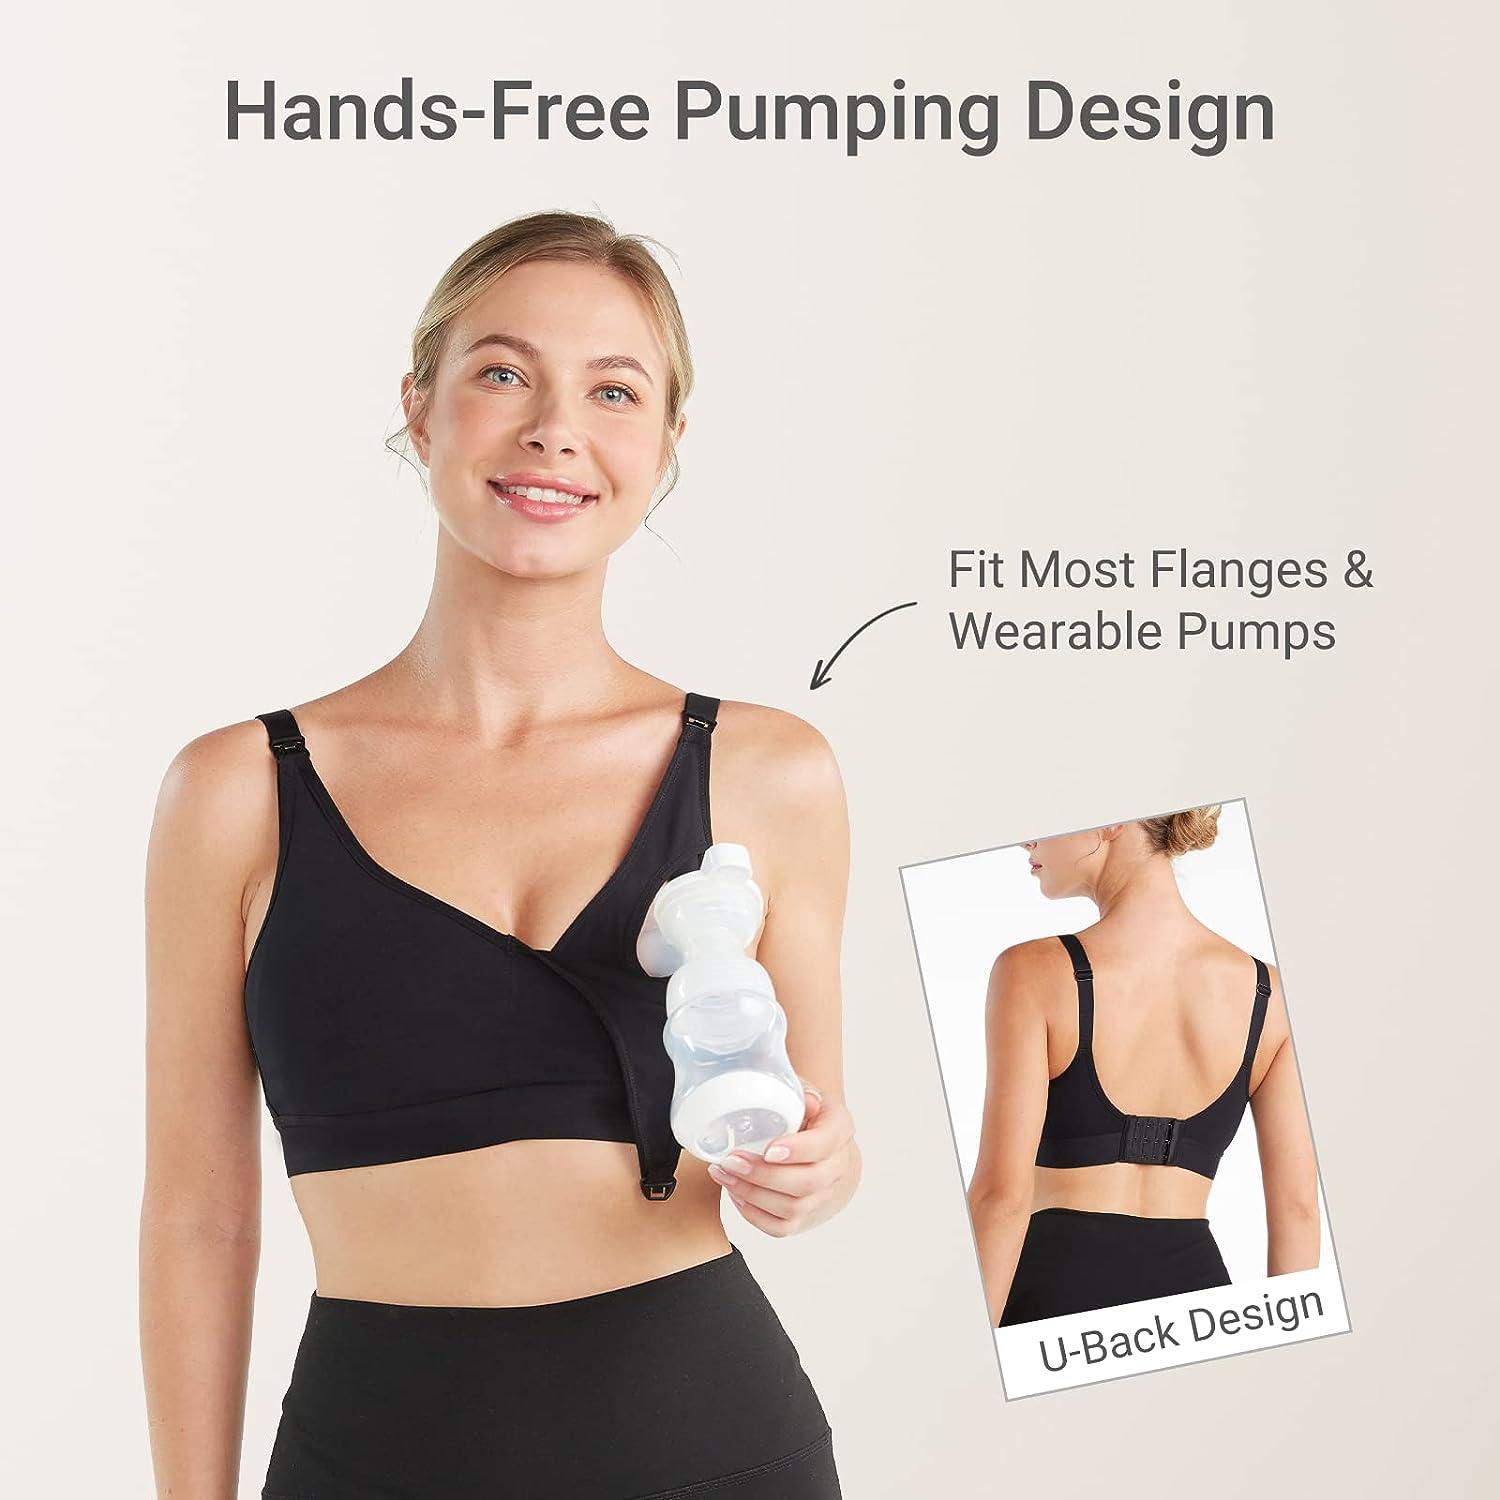 Momcozy 4-in-1 Pumping Bra Hands Free, Fixed Padding India